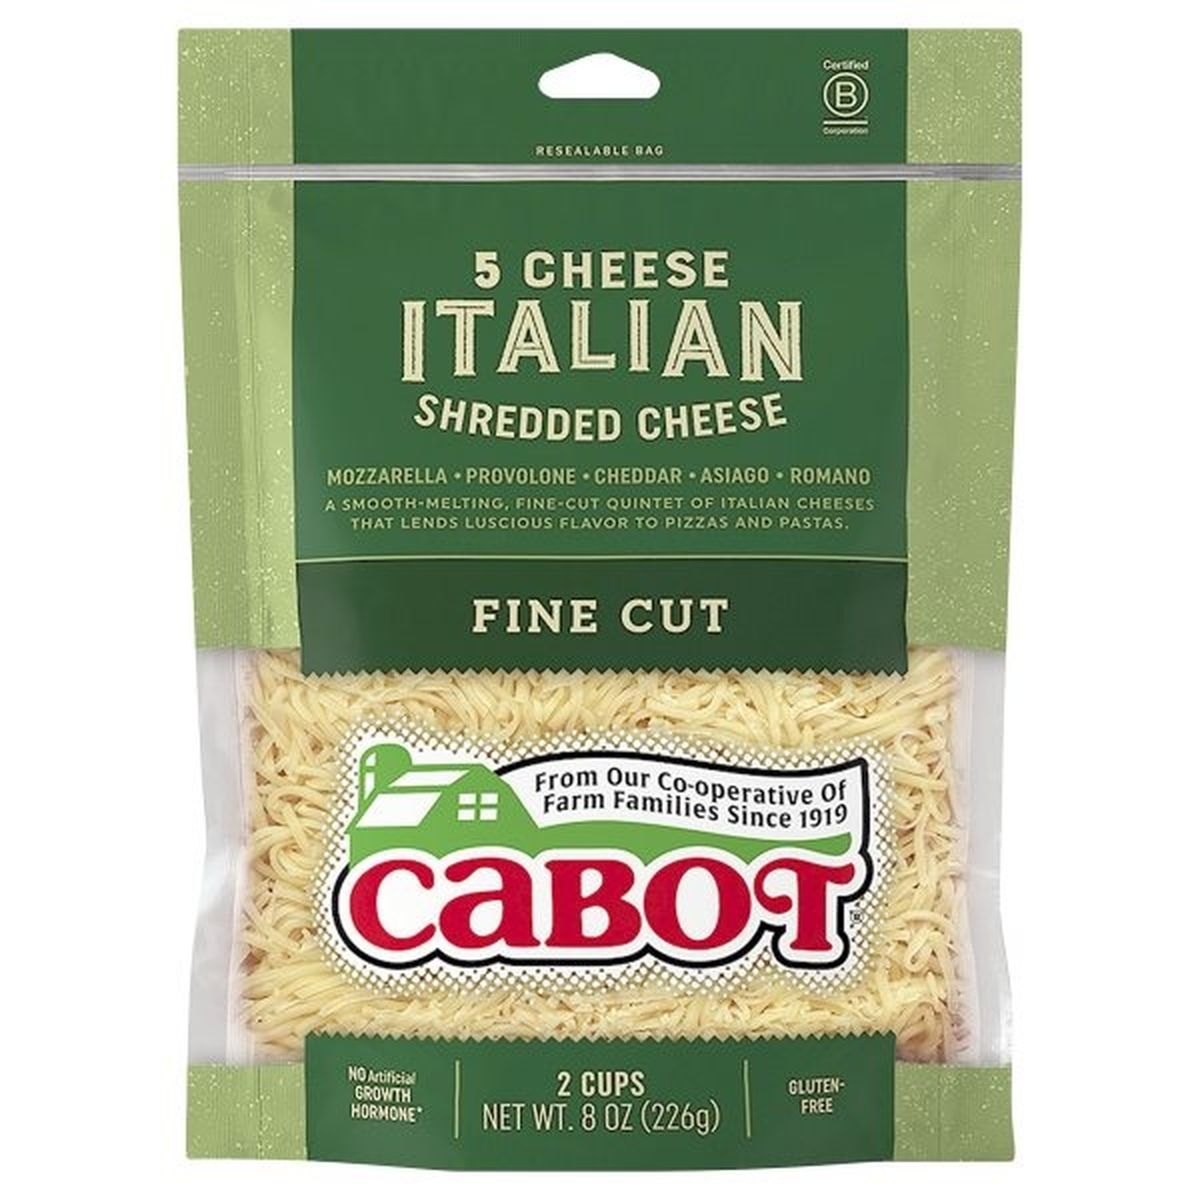 Calories in Cabot 5 Cheese Italian Shredded Cheese